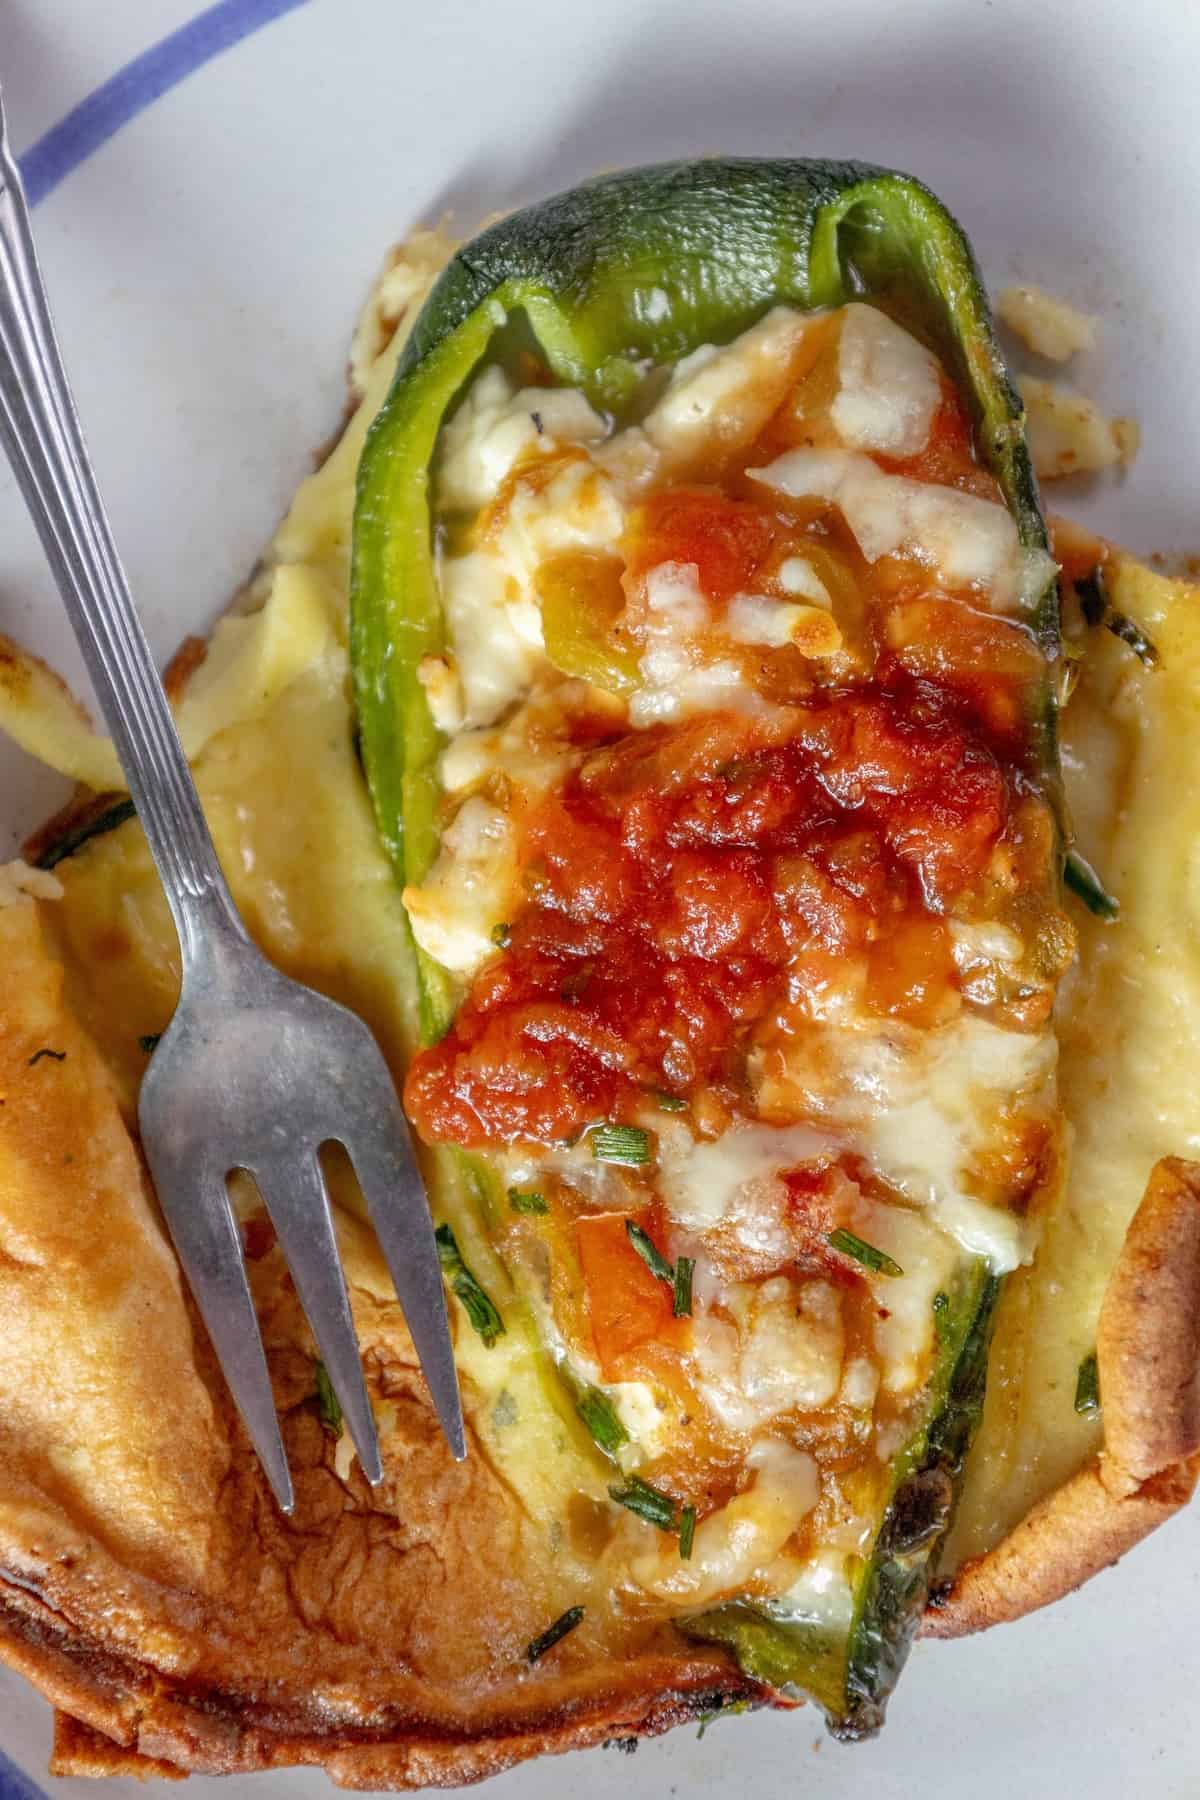 Skillet-baked Chile Rellenos on a plate with a fork.